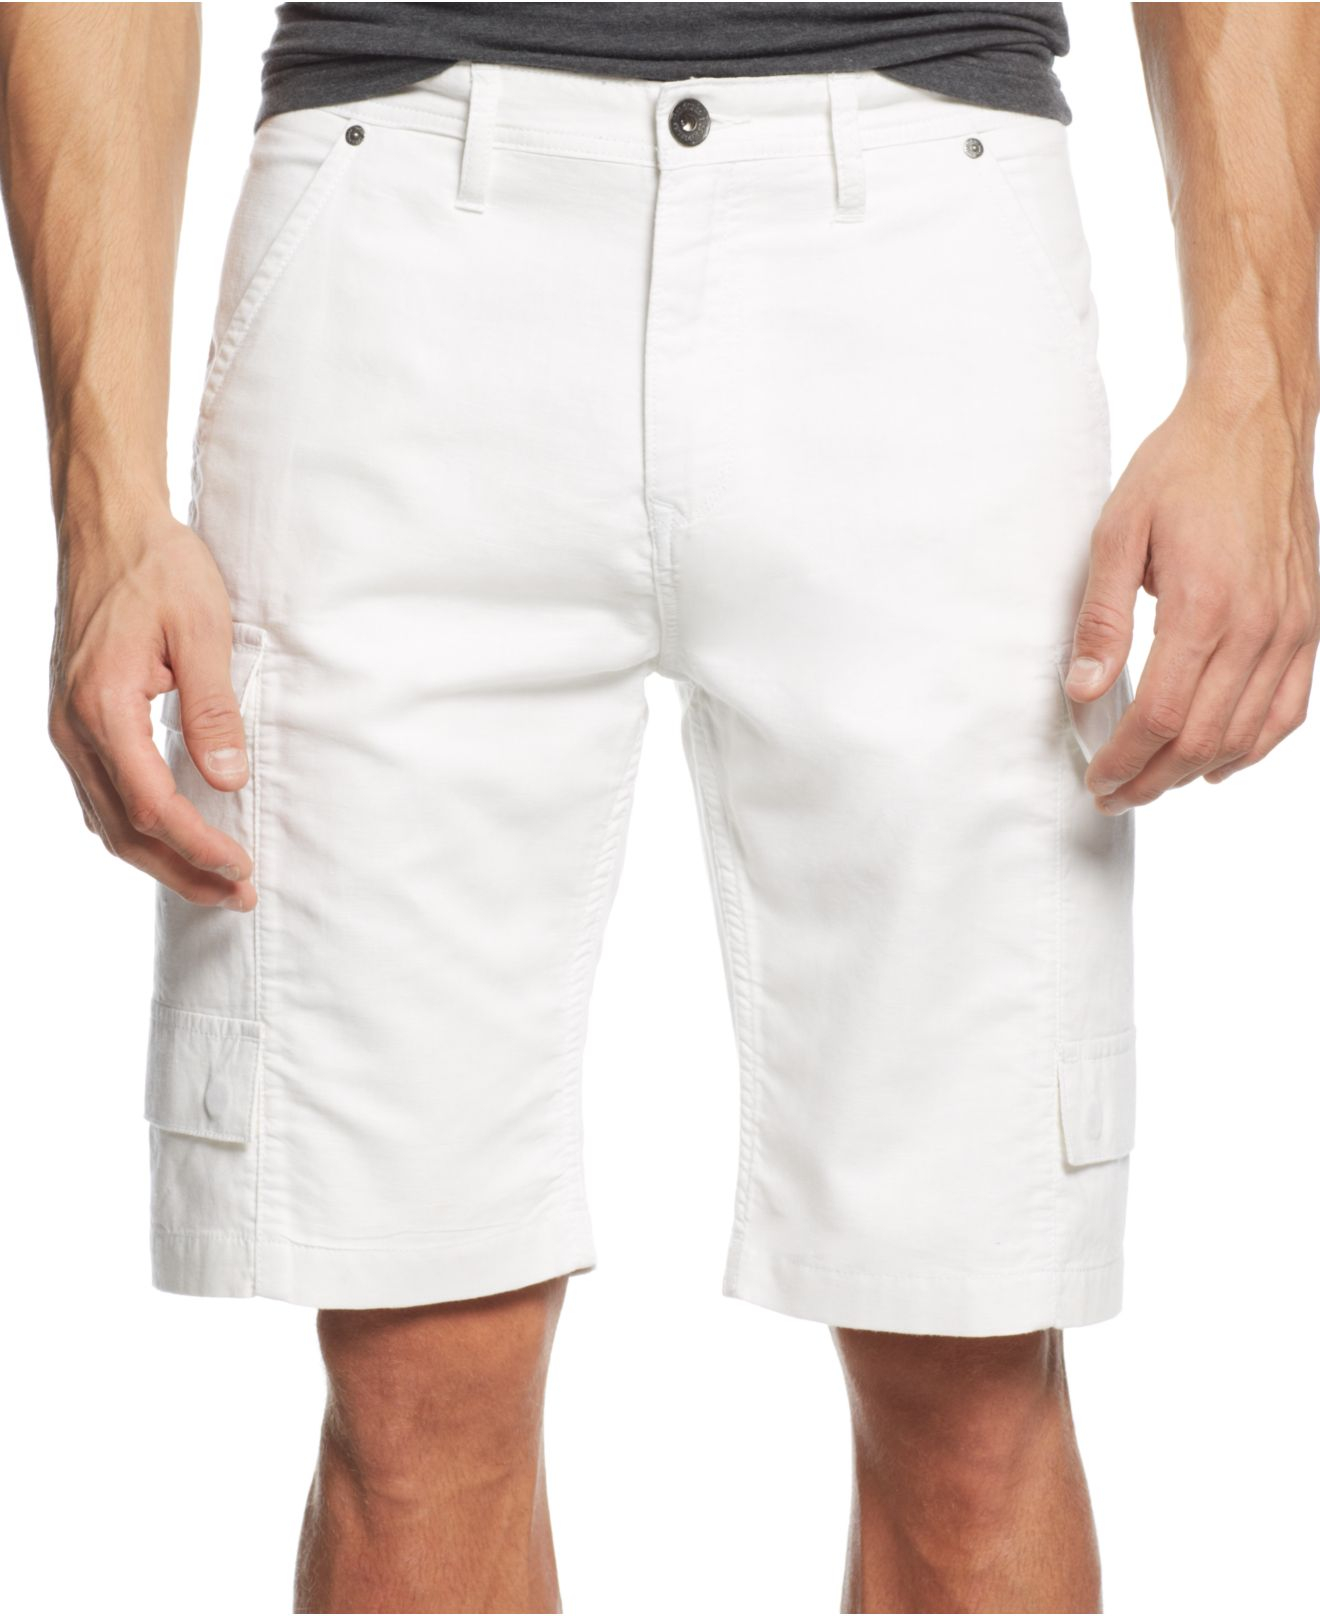 Guess Linen-blend Shorts in White for Men - Lyst